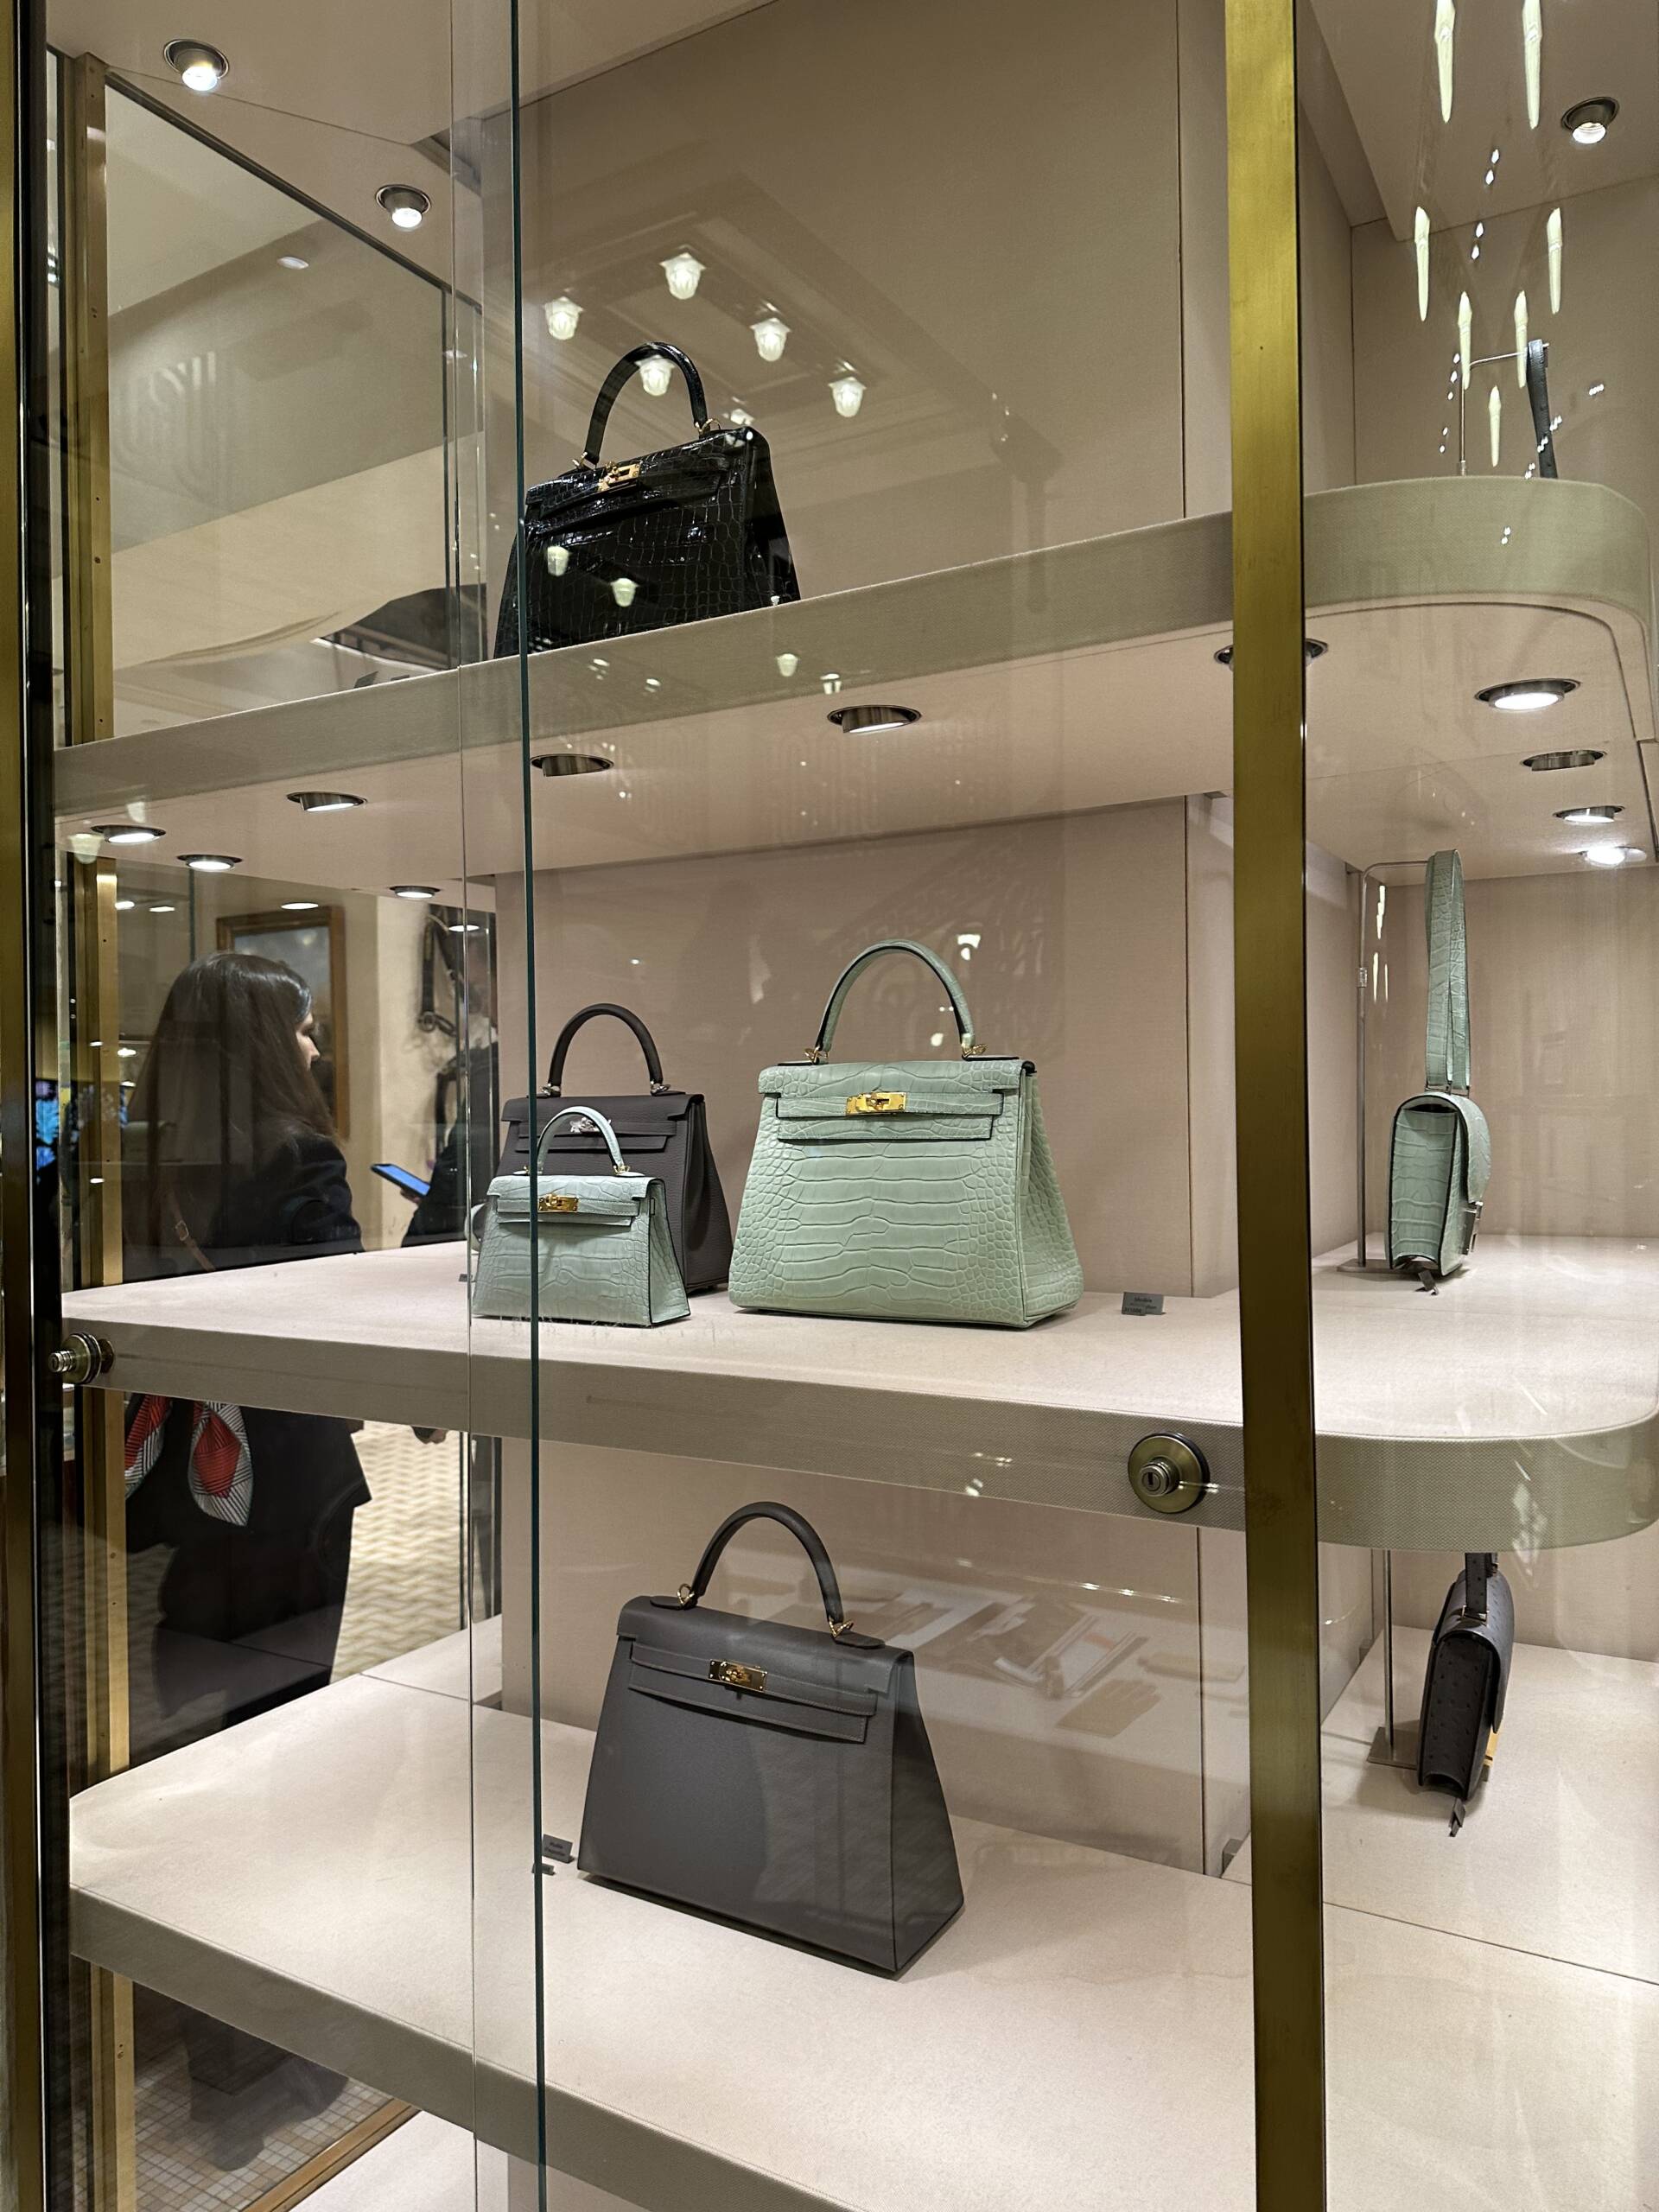 If You Want to Buy an Hermès Bag When Visiting Paris, This is the